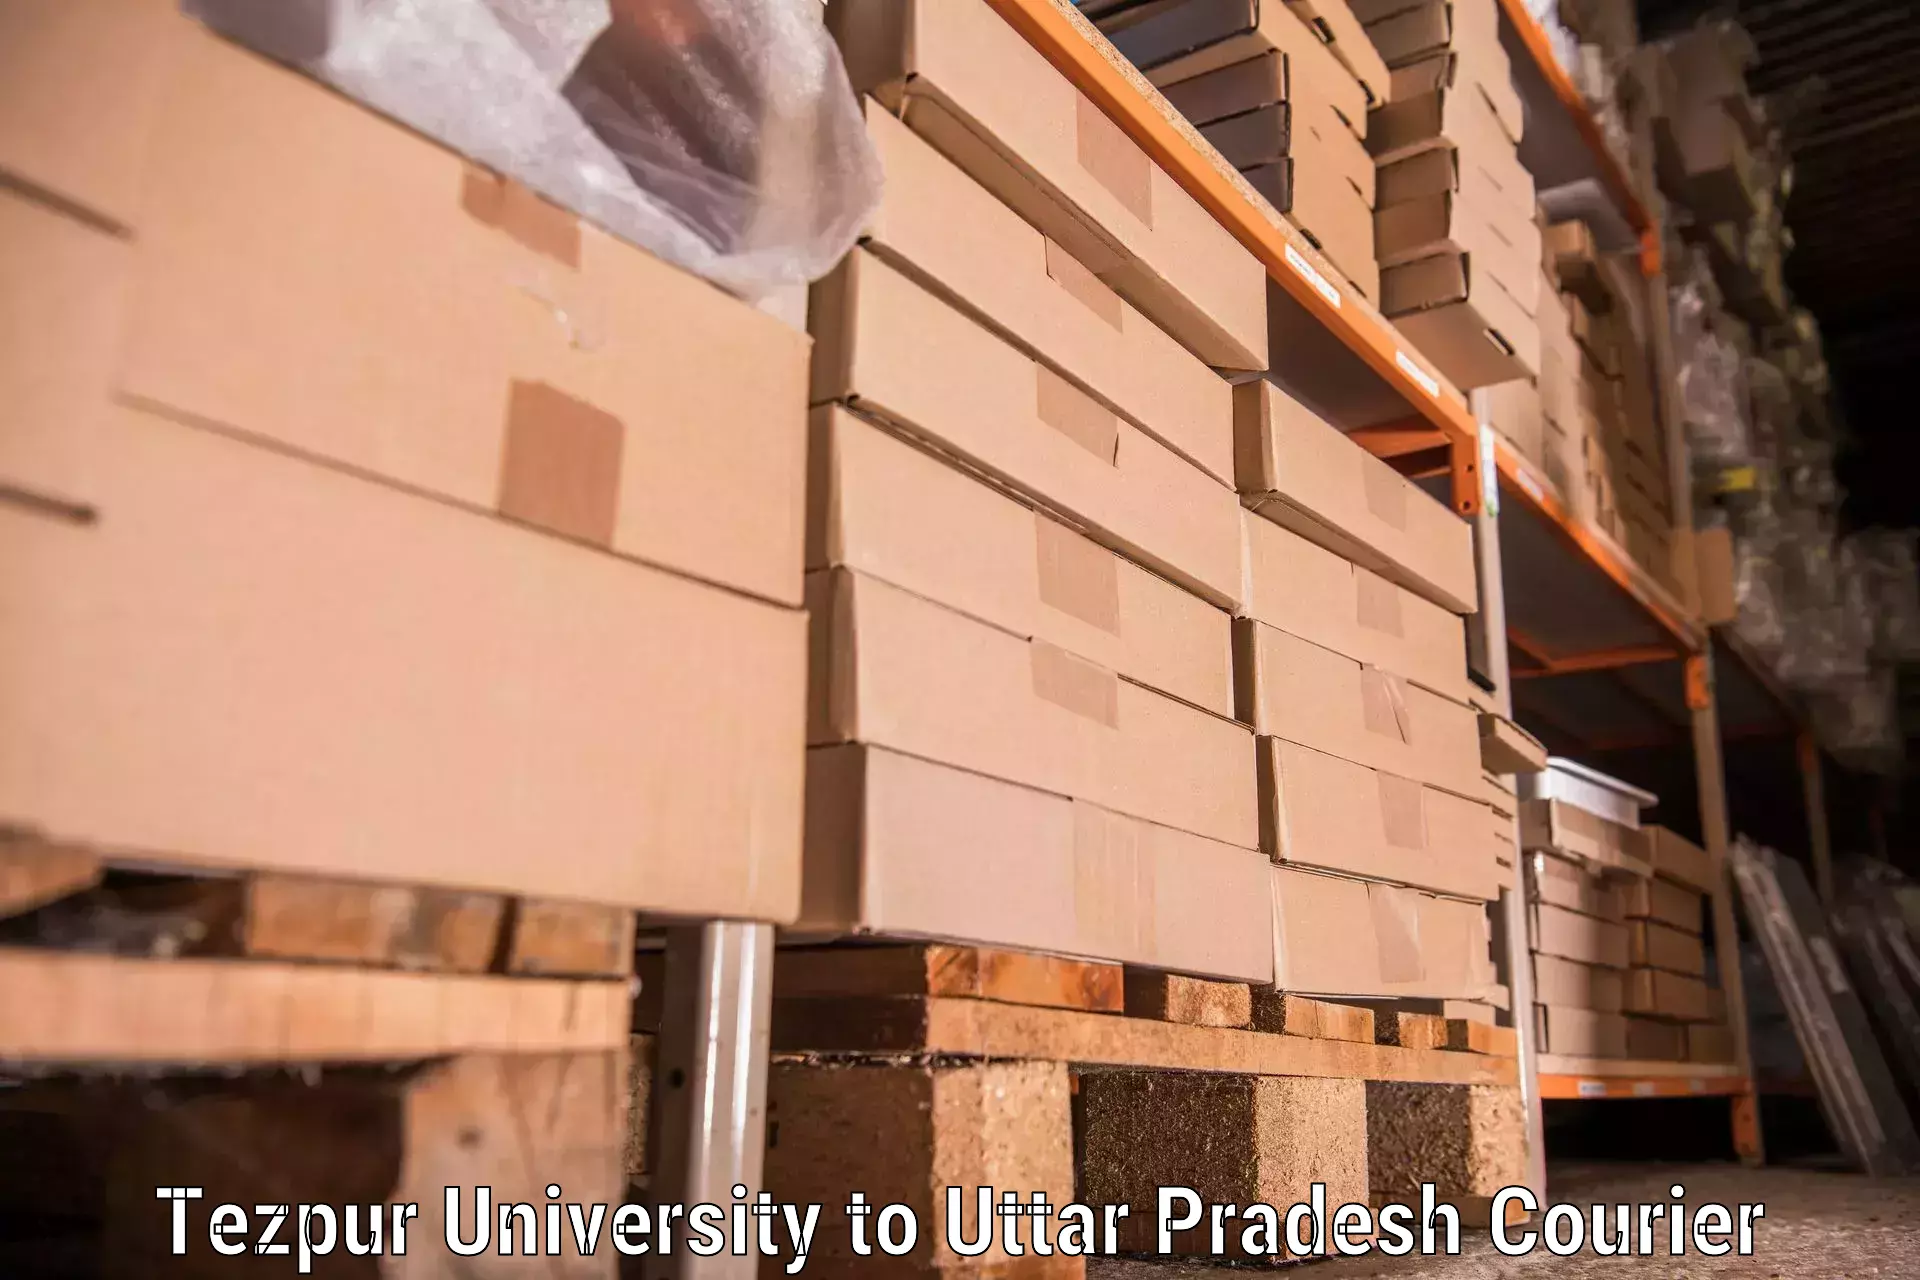 Efficient household movers Tezpur University to Chandausi